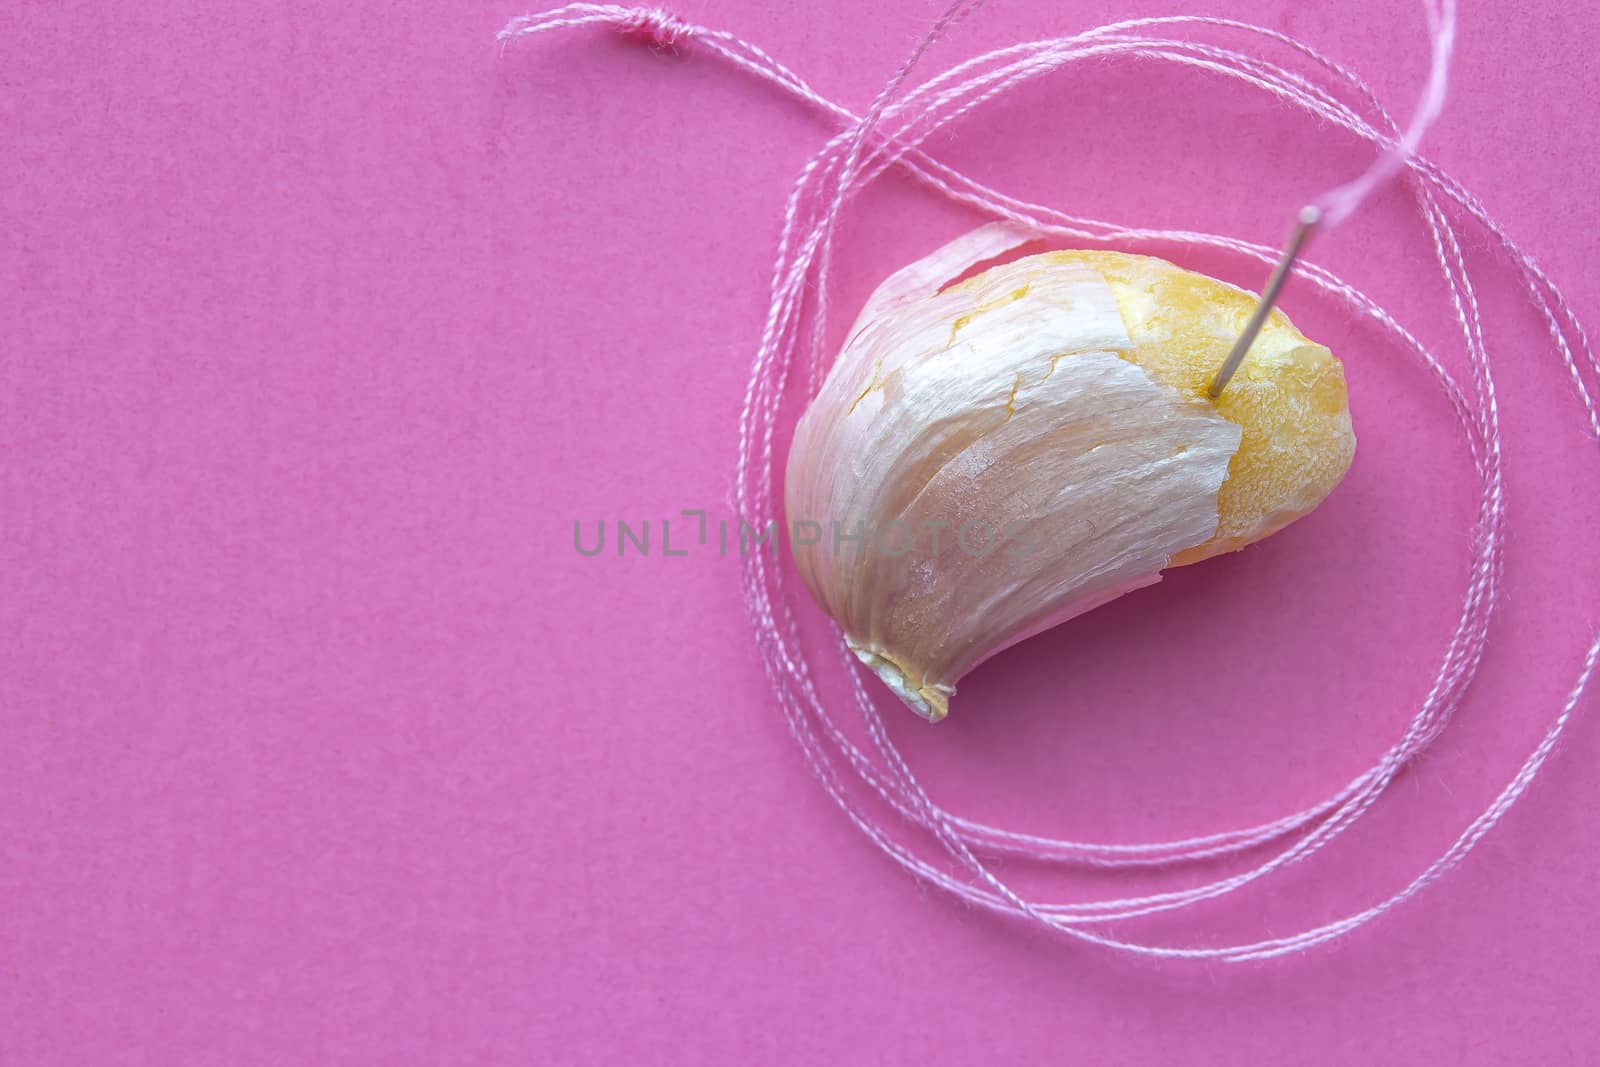 A single garlic with sewing needle and a pink Spool Of Pink Sewing Thread With Needle and pink background on the right side.